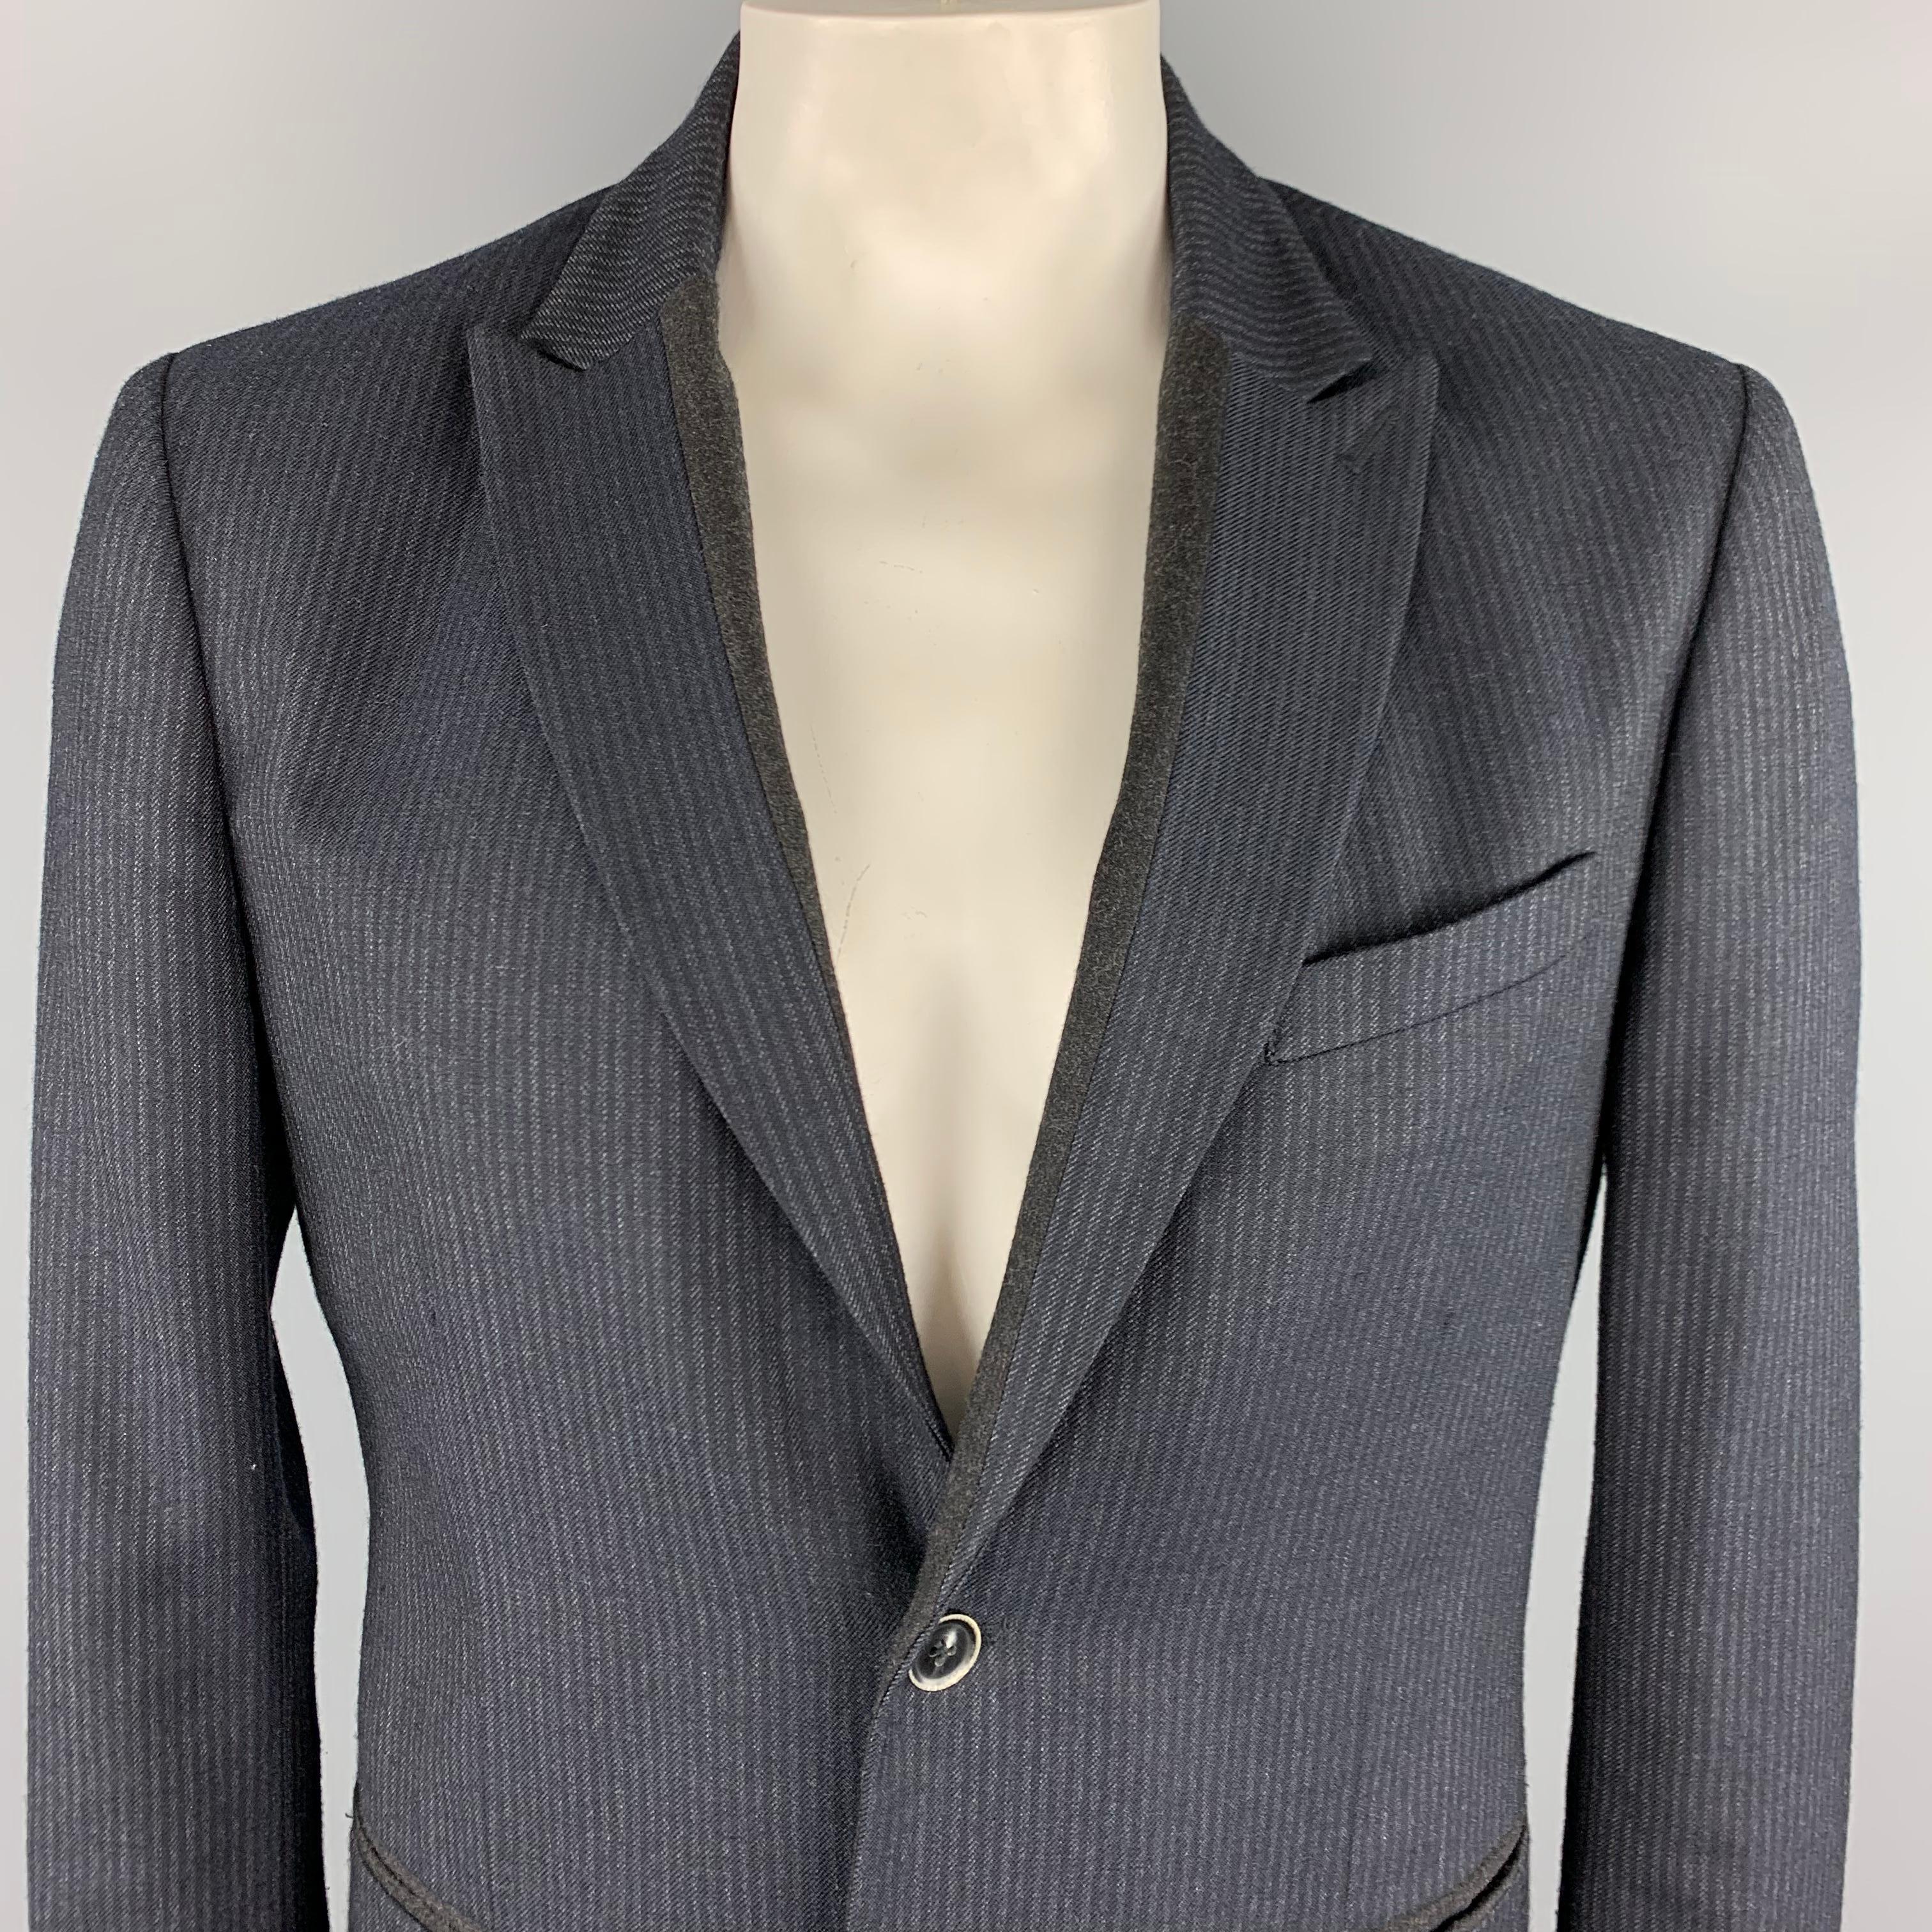 JOHN VARVATOS LUXE Sport Coat comes in a charcoal tone in a striped wool blend material, with a peak lapel, slit pockets, two buttons at closure, single breasted, single vent at back, buttoned cuffs, unlined.
 
Excellent Pre-Owned Condition.
Marked: